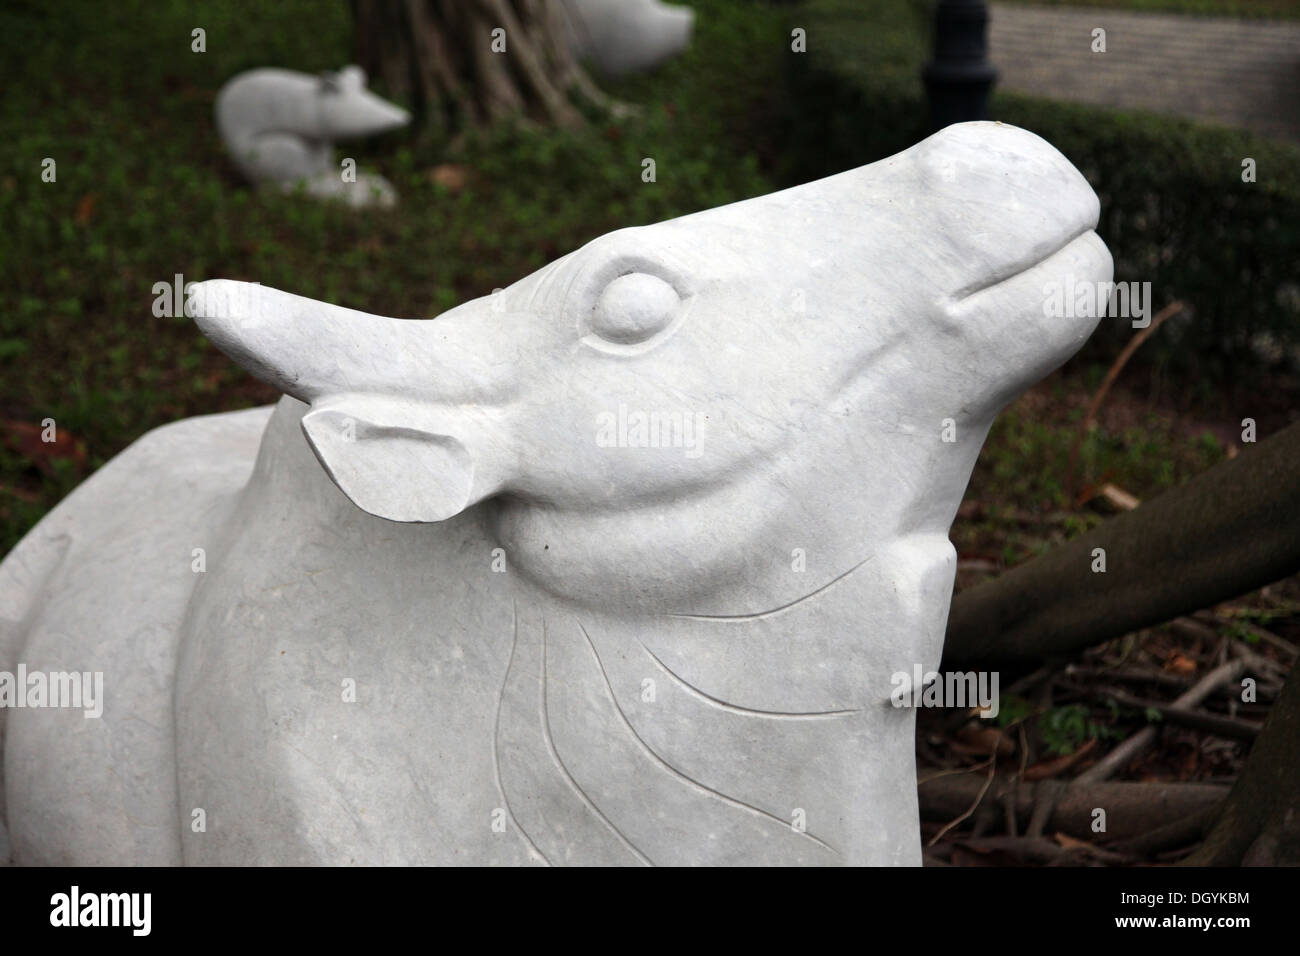 It's a photo of a statue in Paster or white material that is representing a Chinese zodiacal animal: Rabbit Dragon Ox dog cow Stock Photo